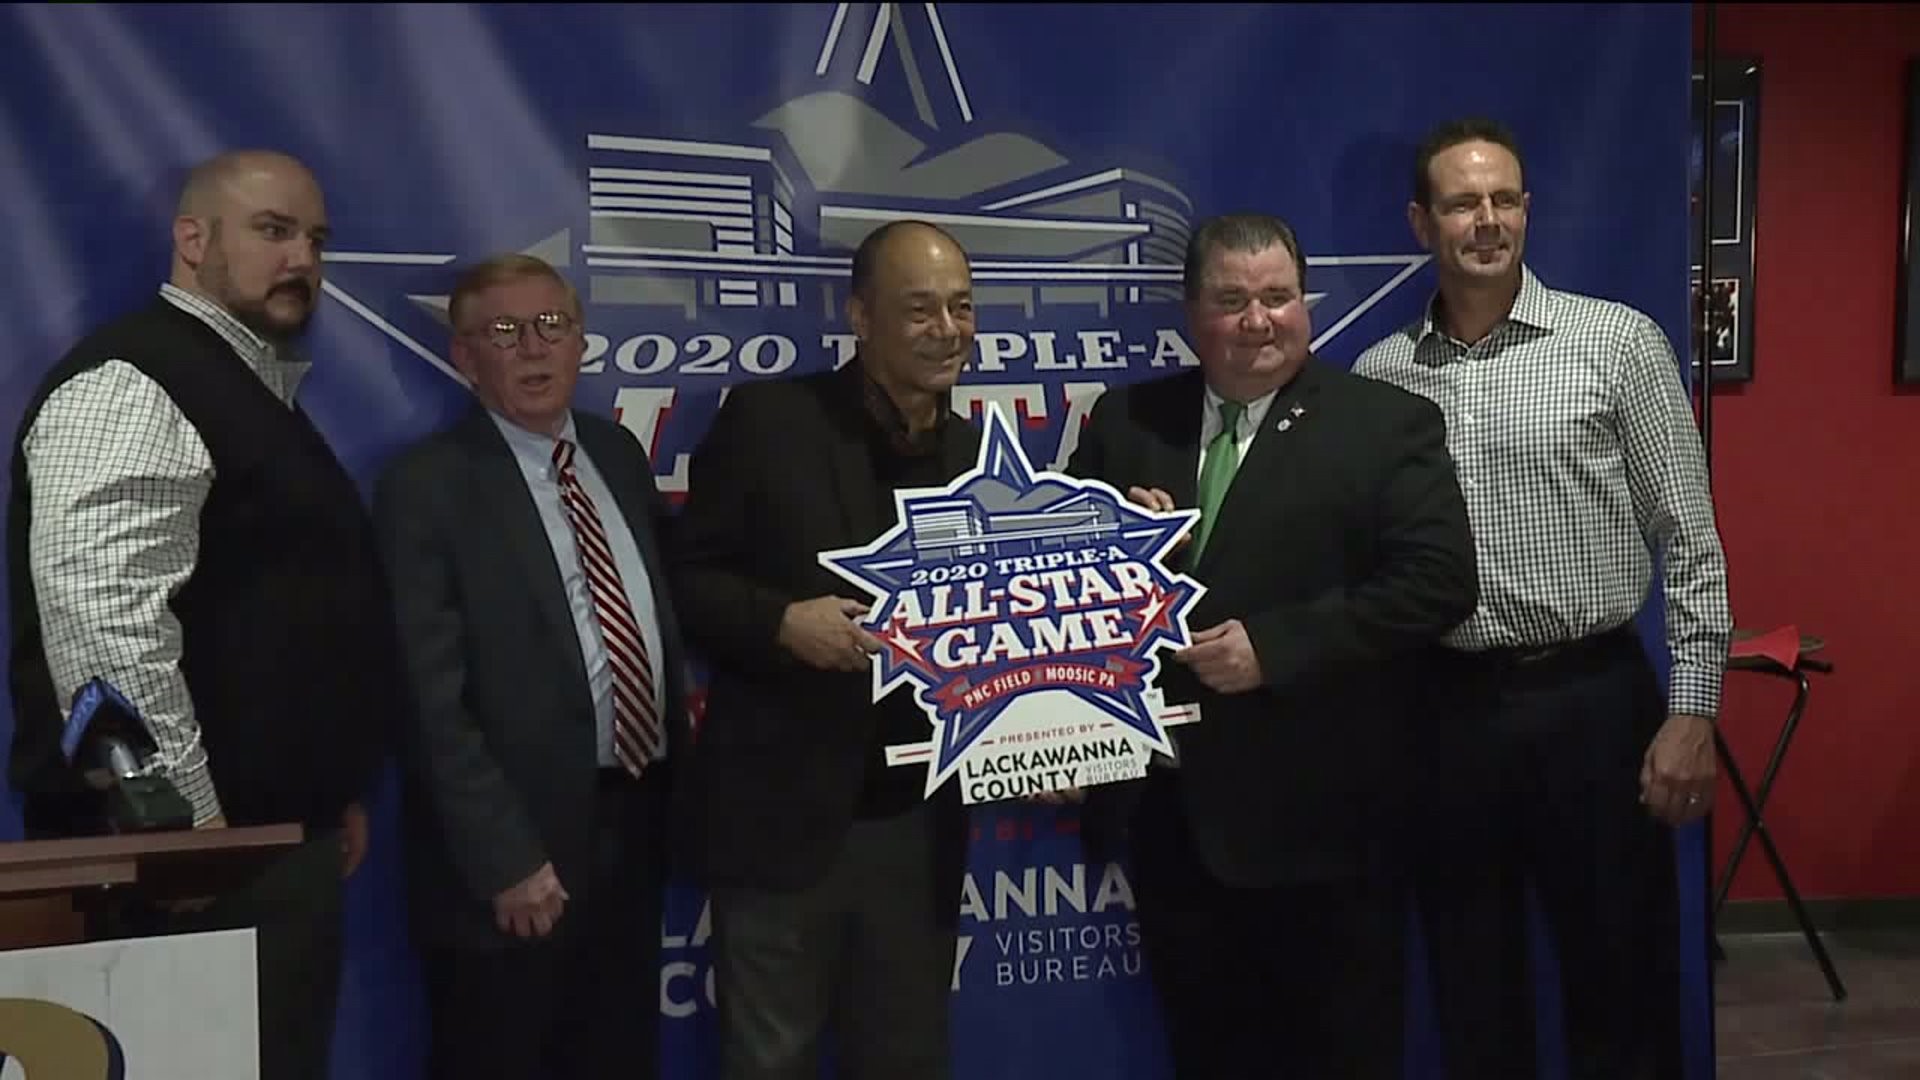 SWB RailRiders to host 2020 AAA All Star Game